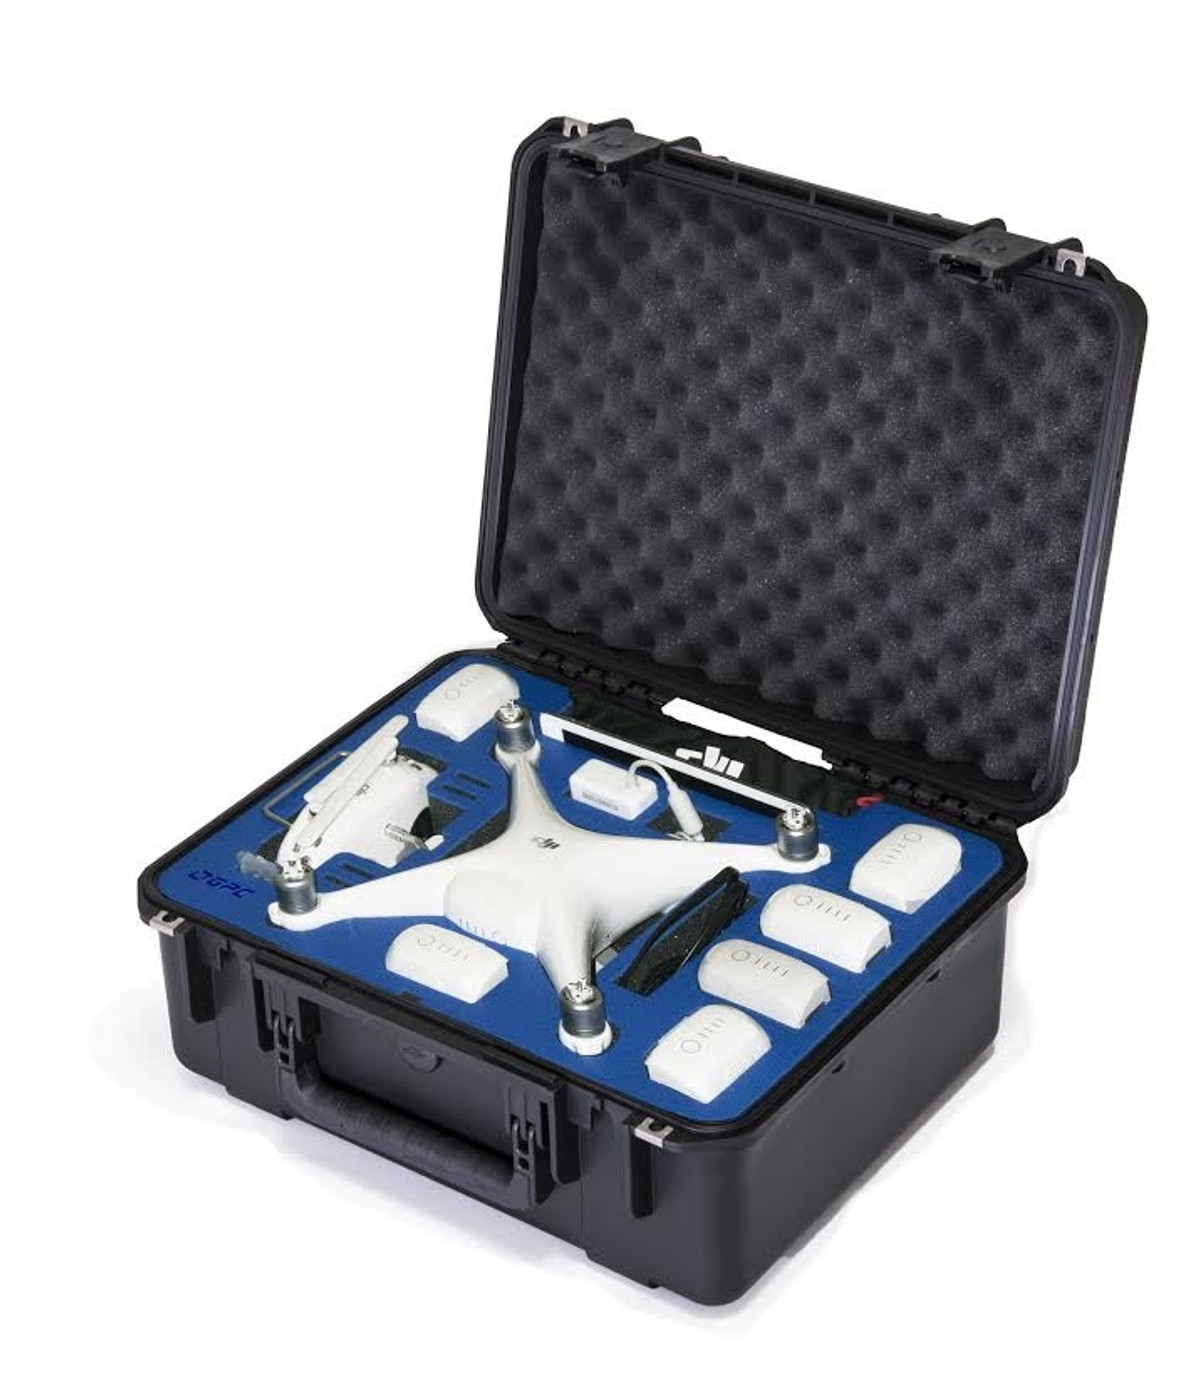 Phantom 4 Pro v2 with 2 Spare Batteries and Case